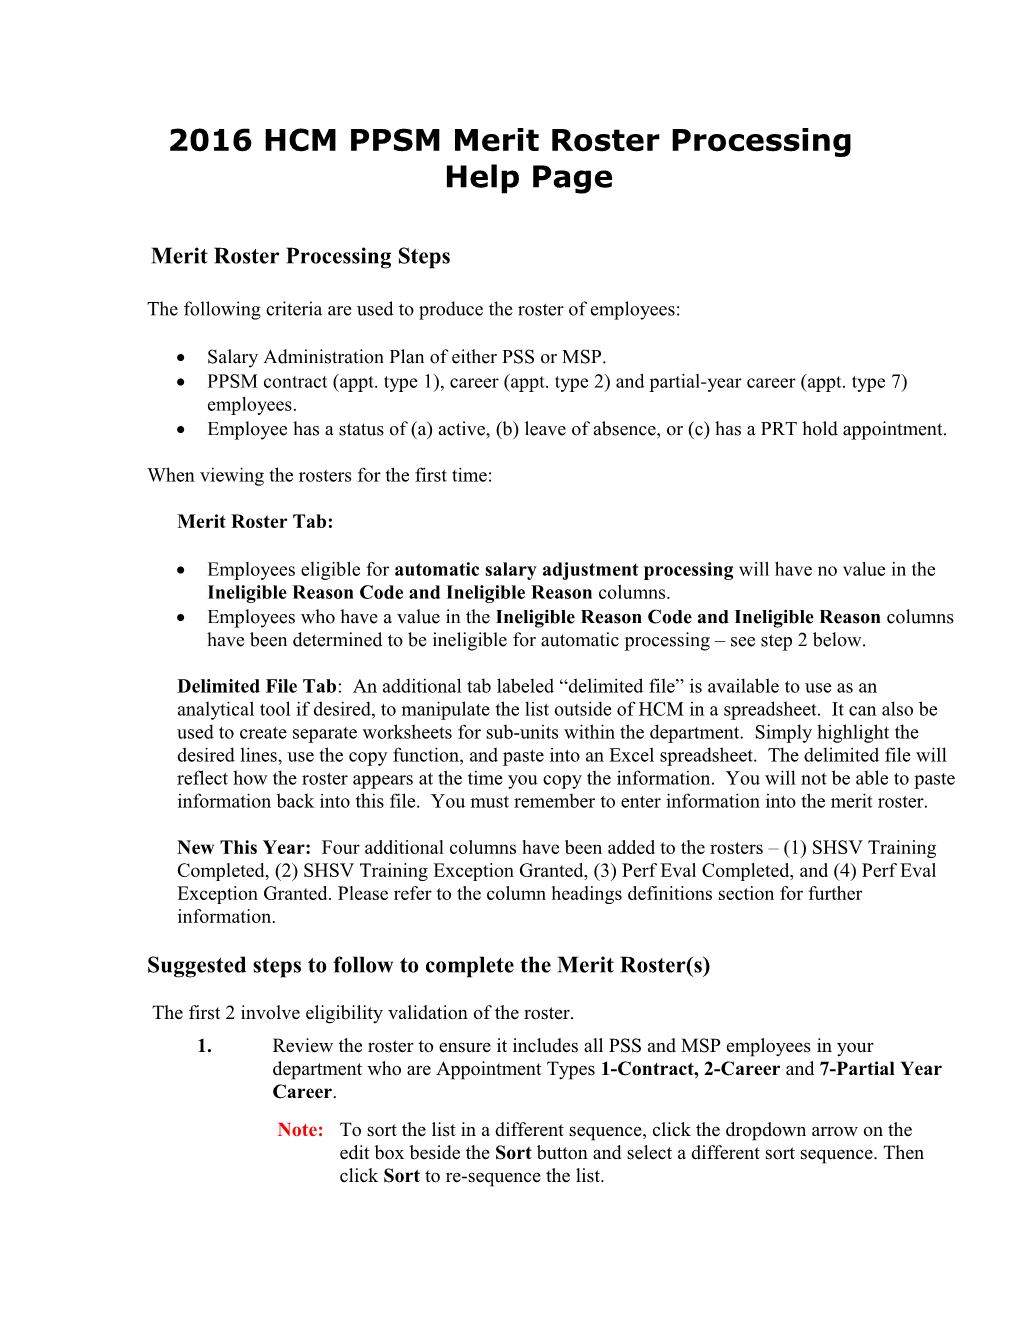 2002 HRMS Merit Processing Help Page